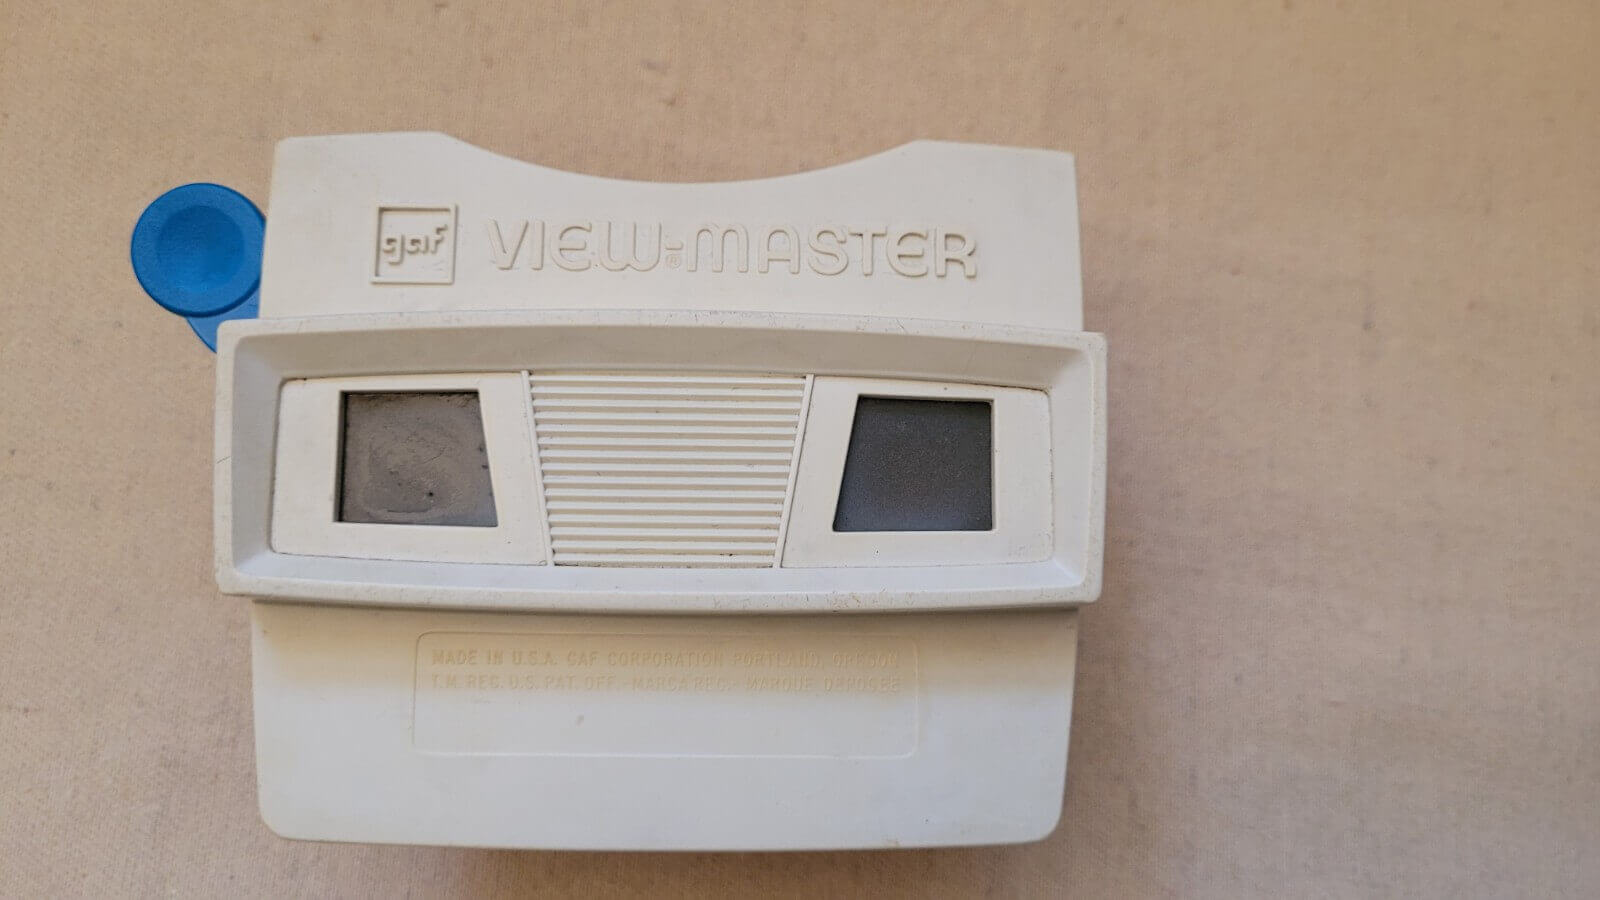 Vintage 70s GAF View-Master reel viewer, red and white color and blue handle